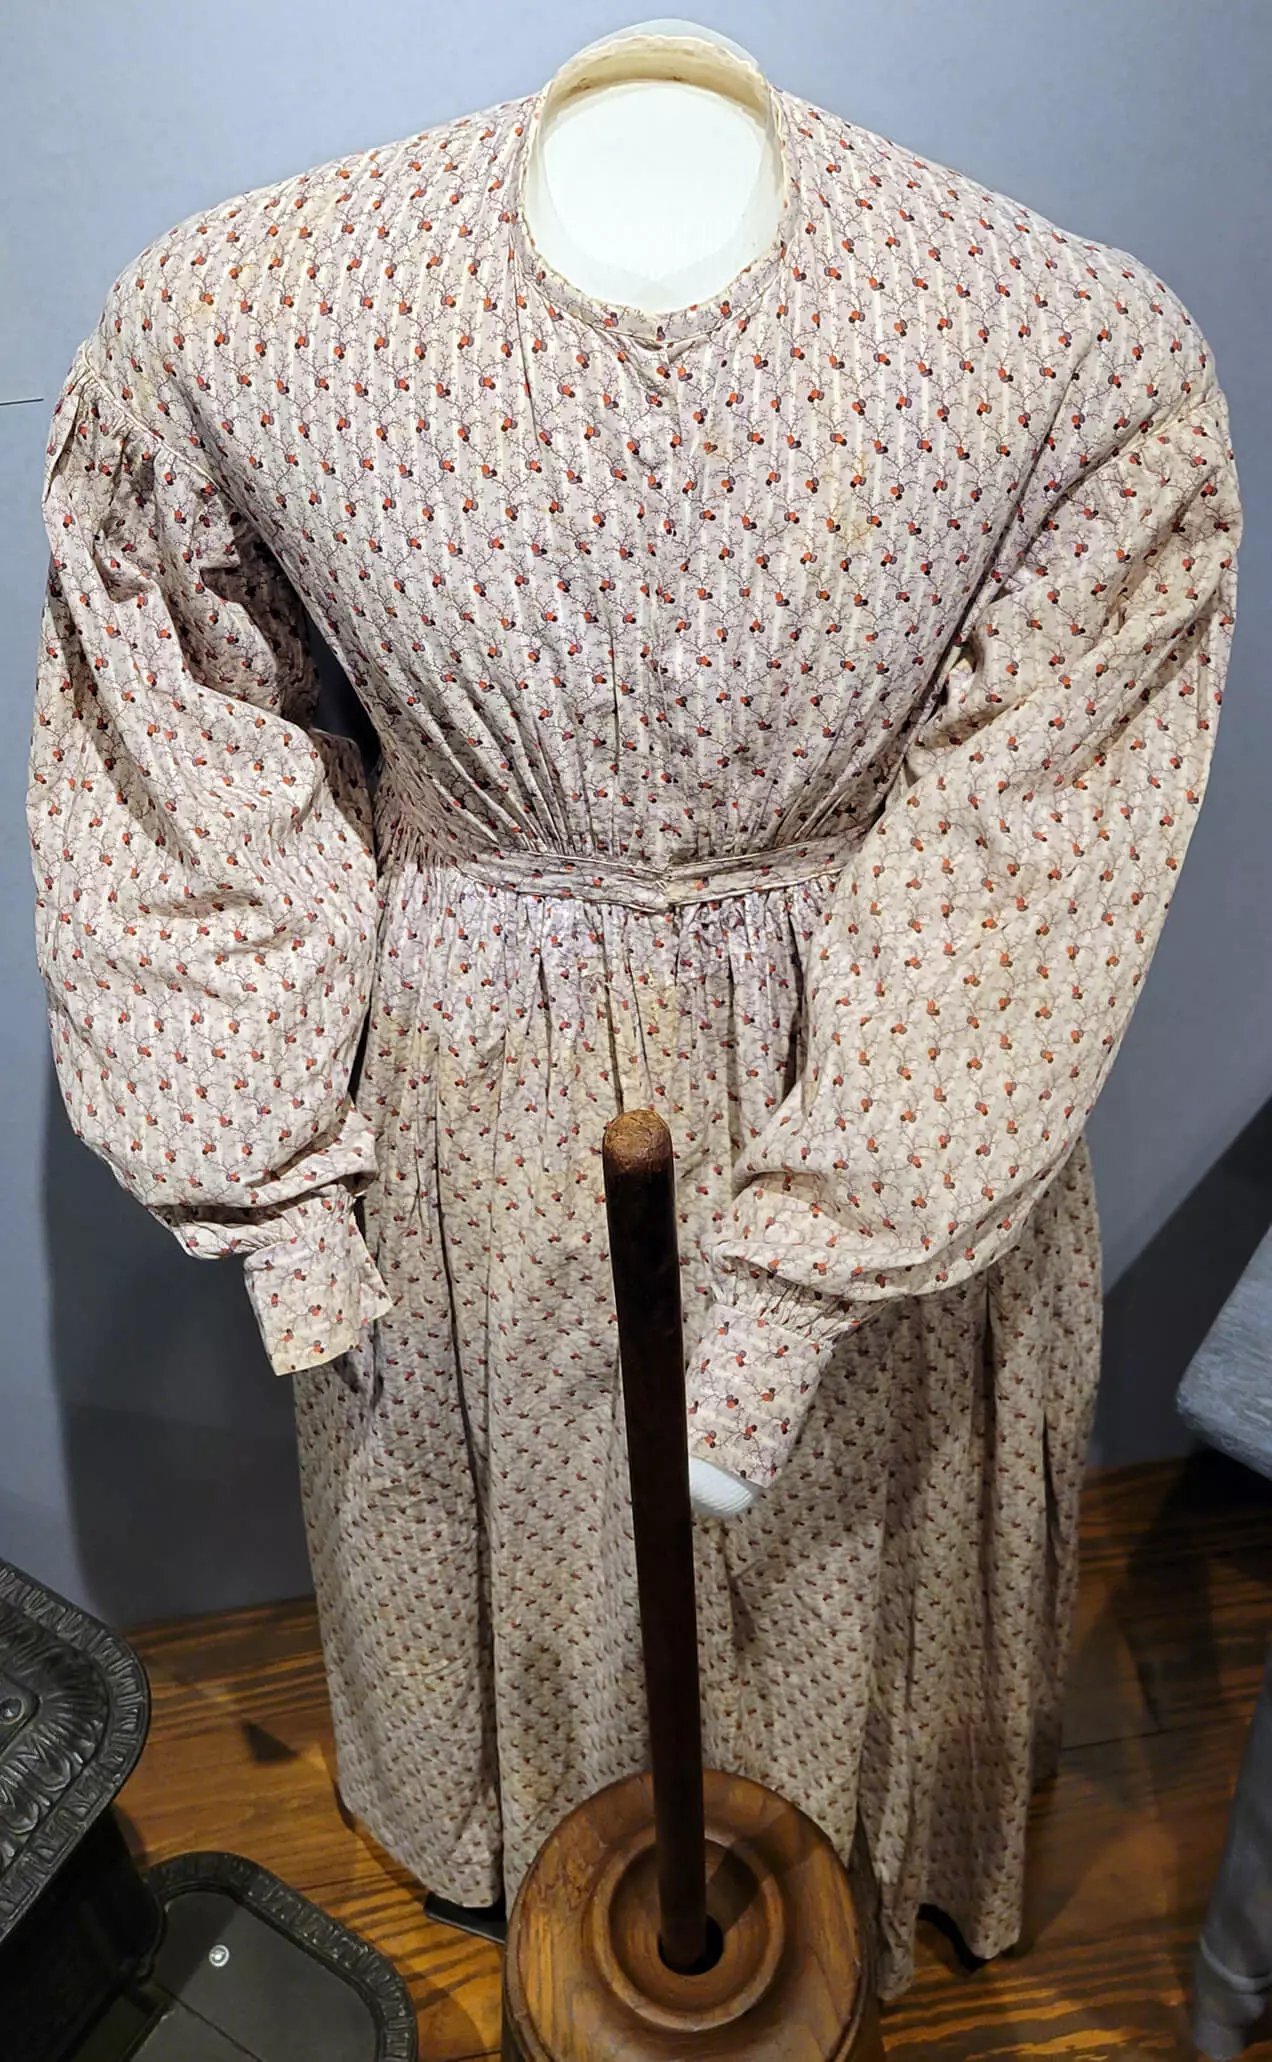 A mostly white dress with a simple pattern. It is long sleeved with a belt at the waist.